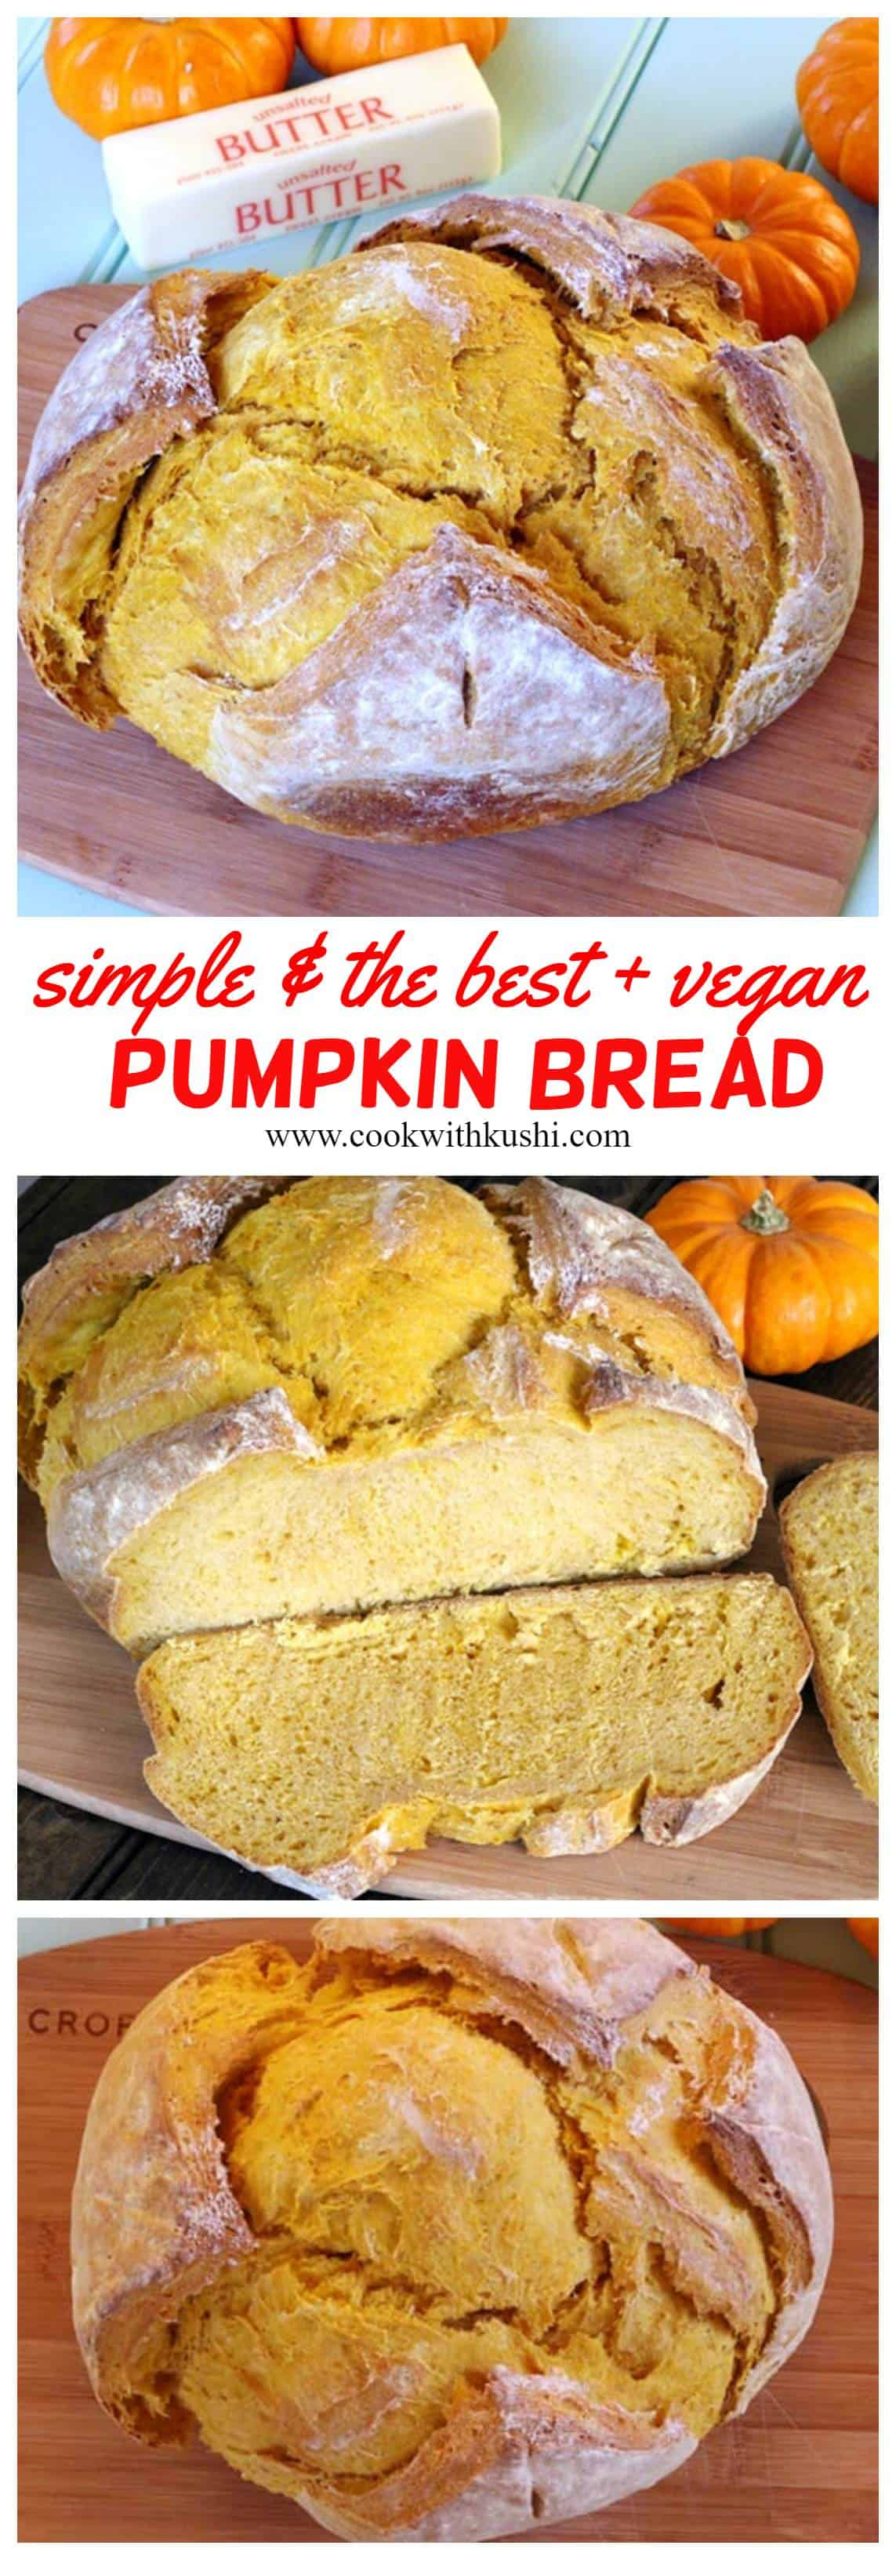 Best, easy and Simple, Vegan Pumpkin Bread recipe to try for dinner this fall and winter season for thanksgiving and christmas